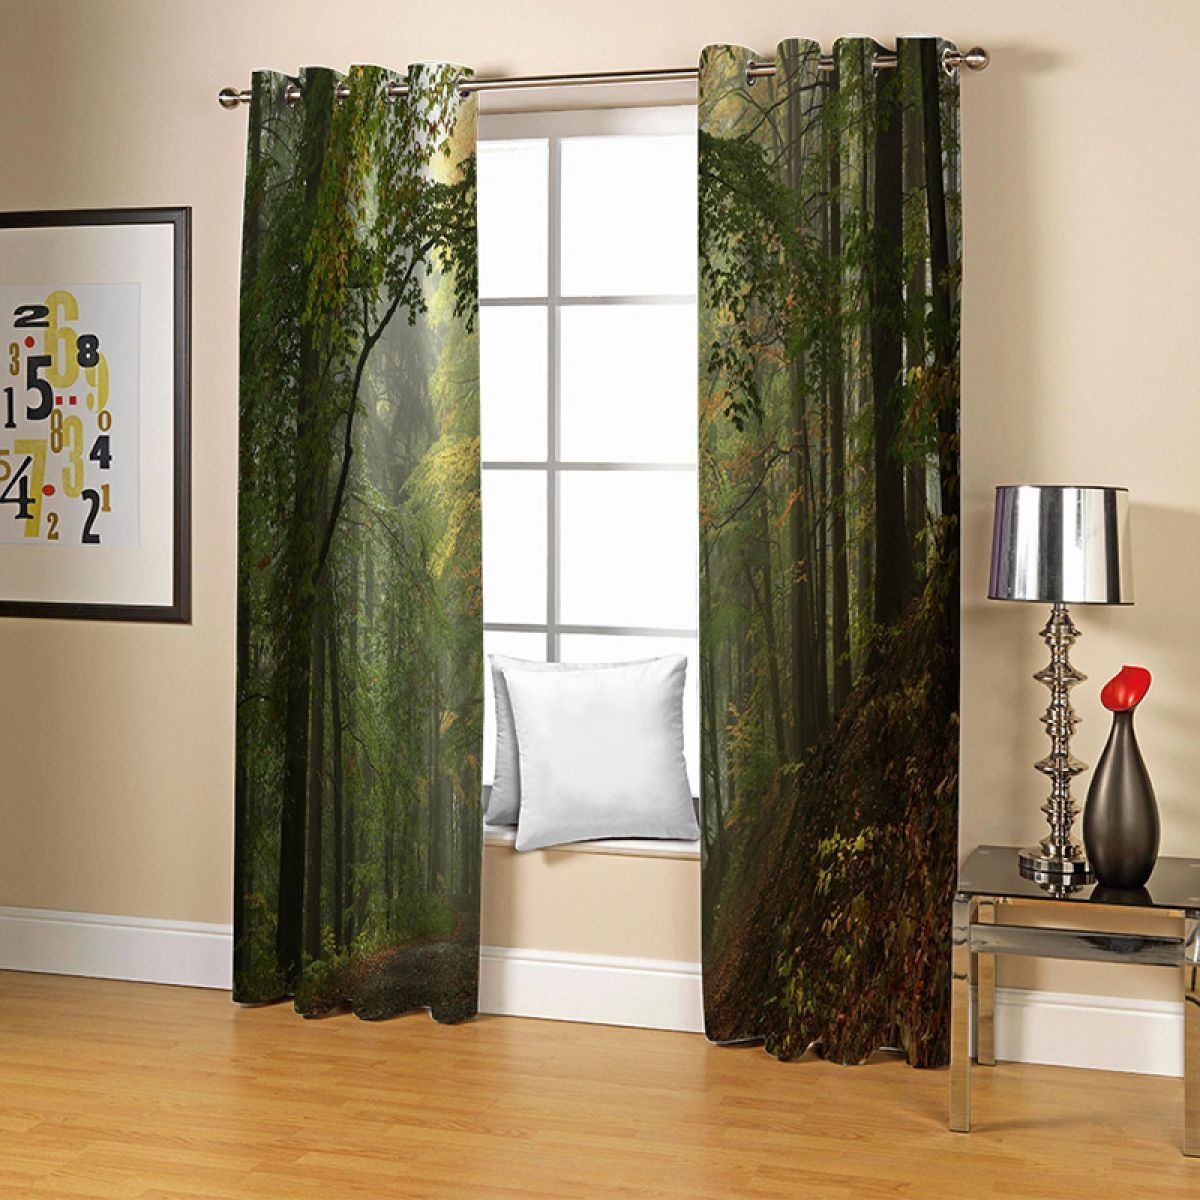 3d forest path printed window curtain home decor 1279